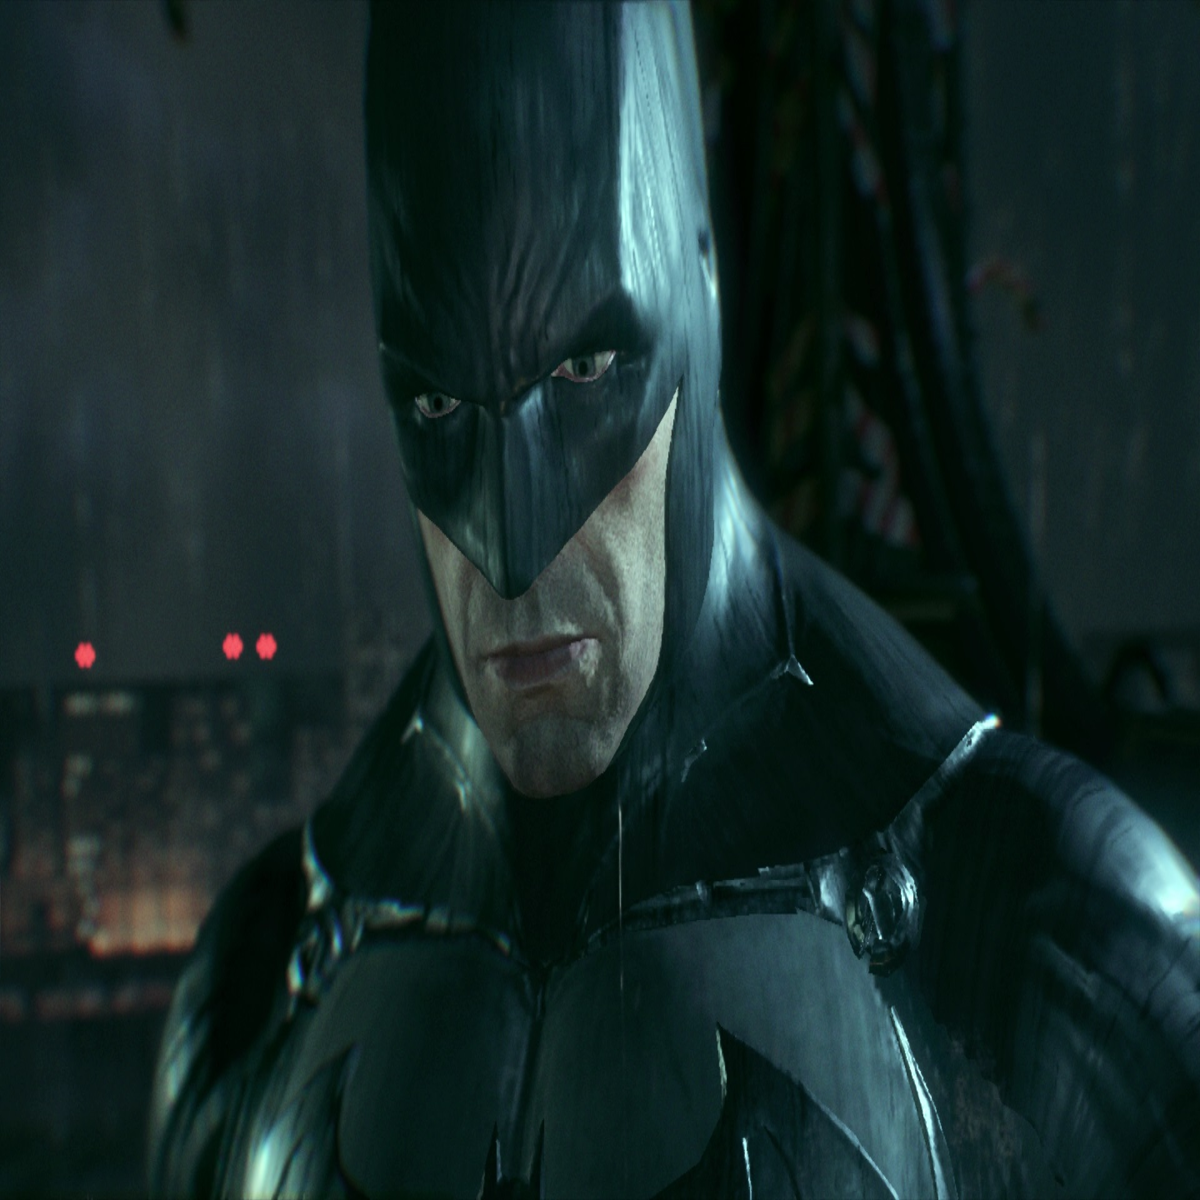 Batman Arkham Knight on Switch suffers from abysmal frame rates